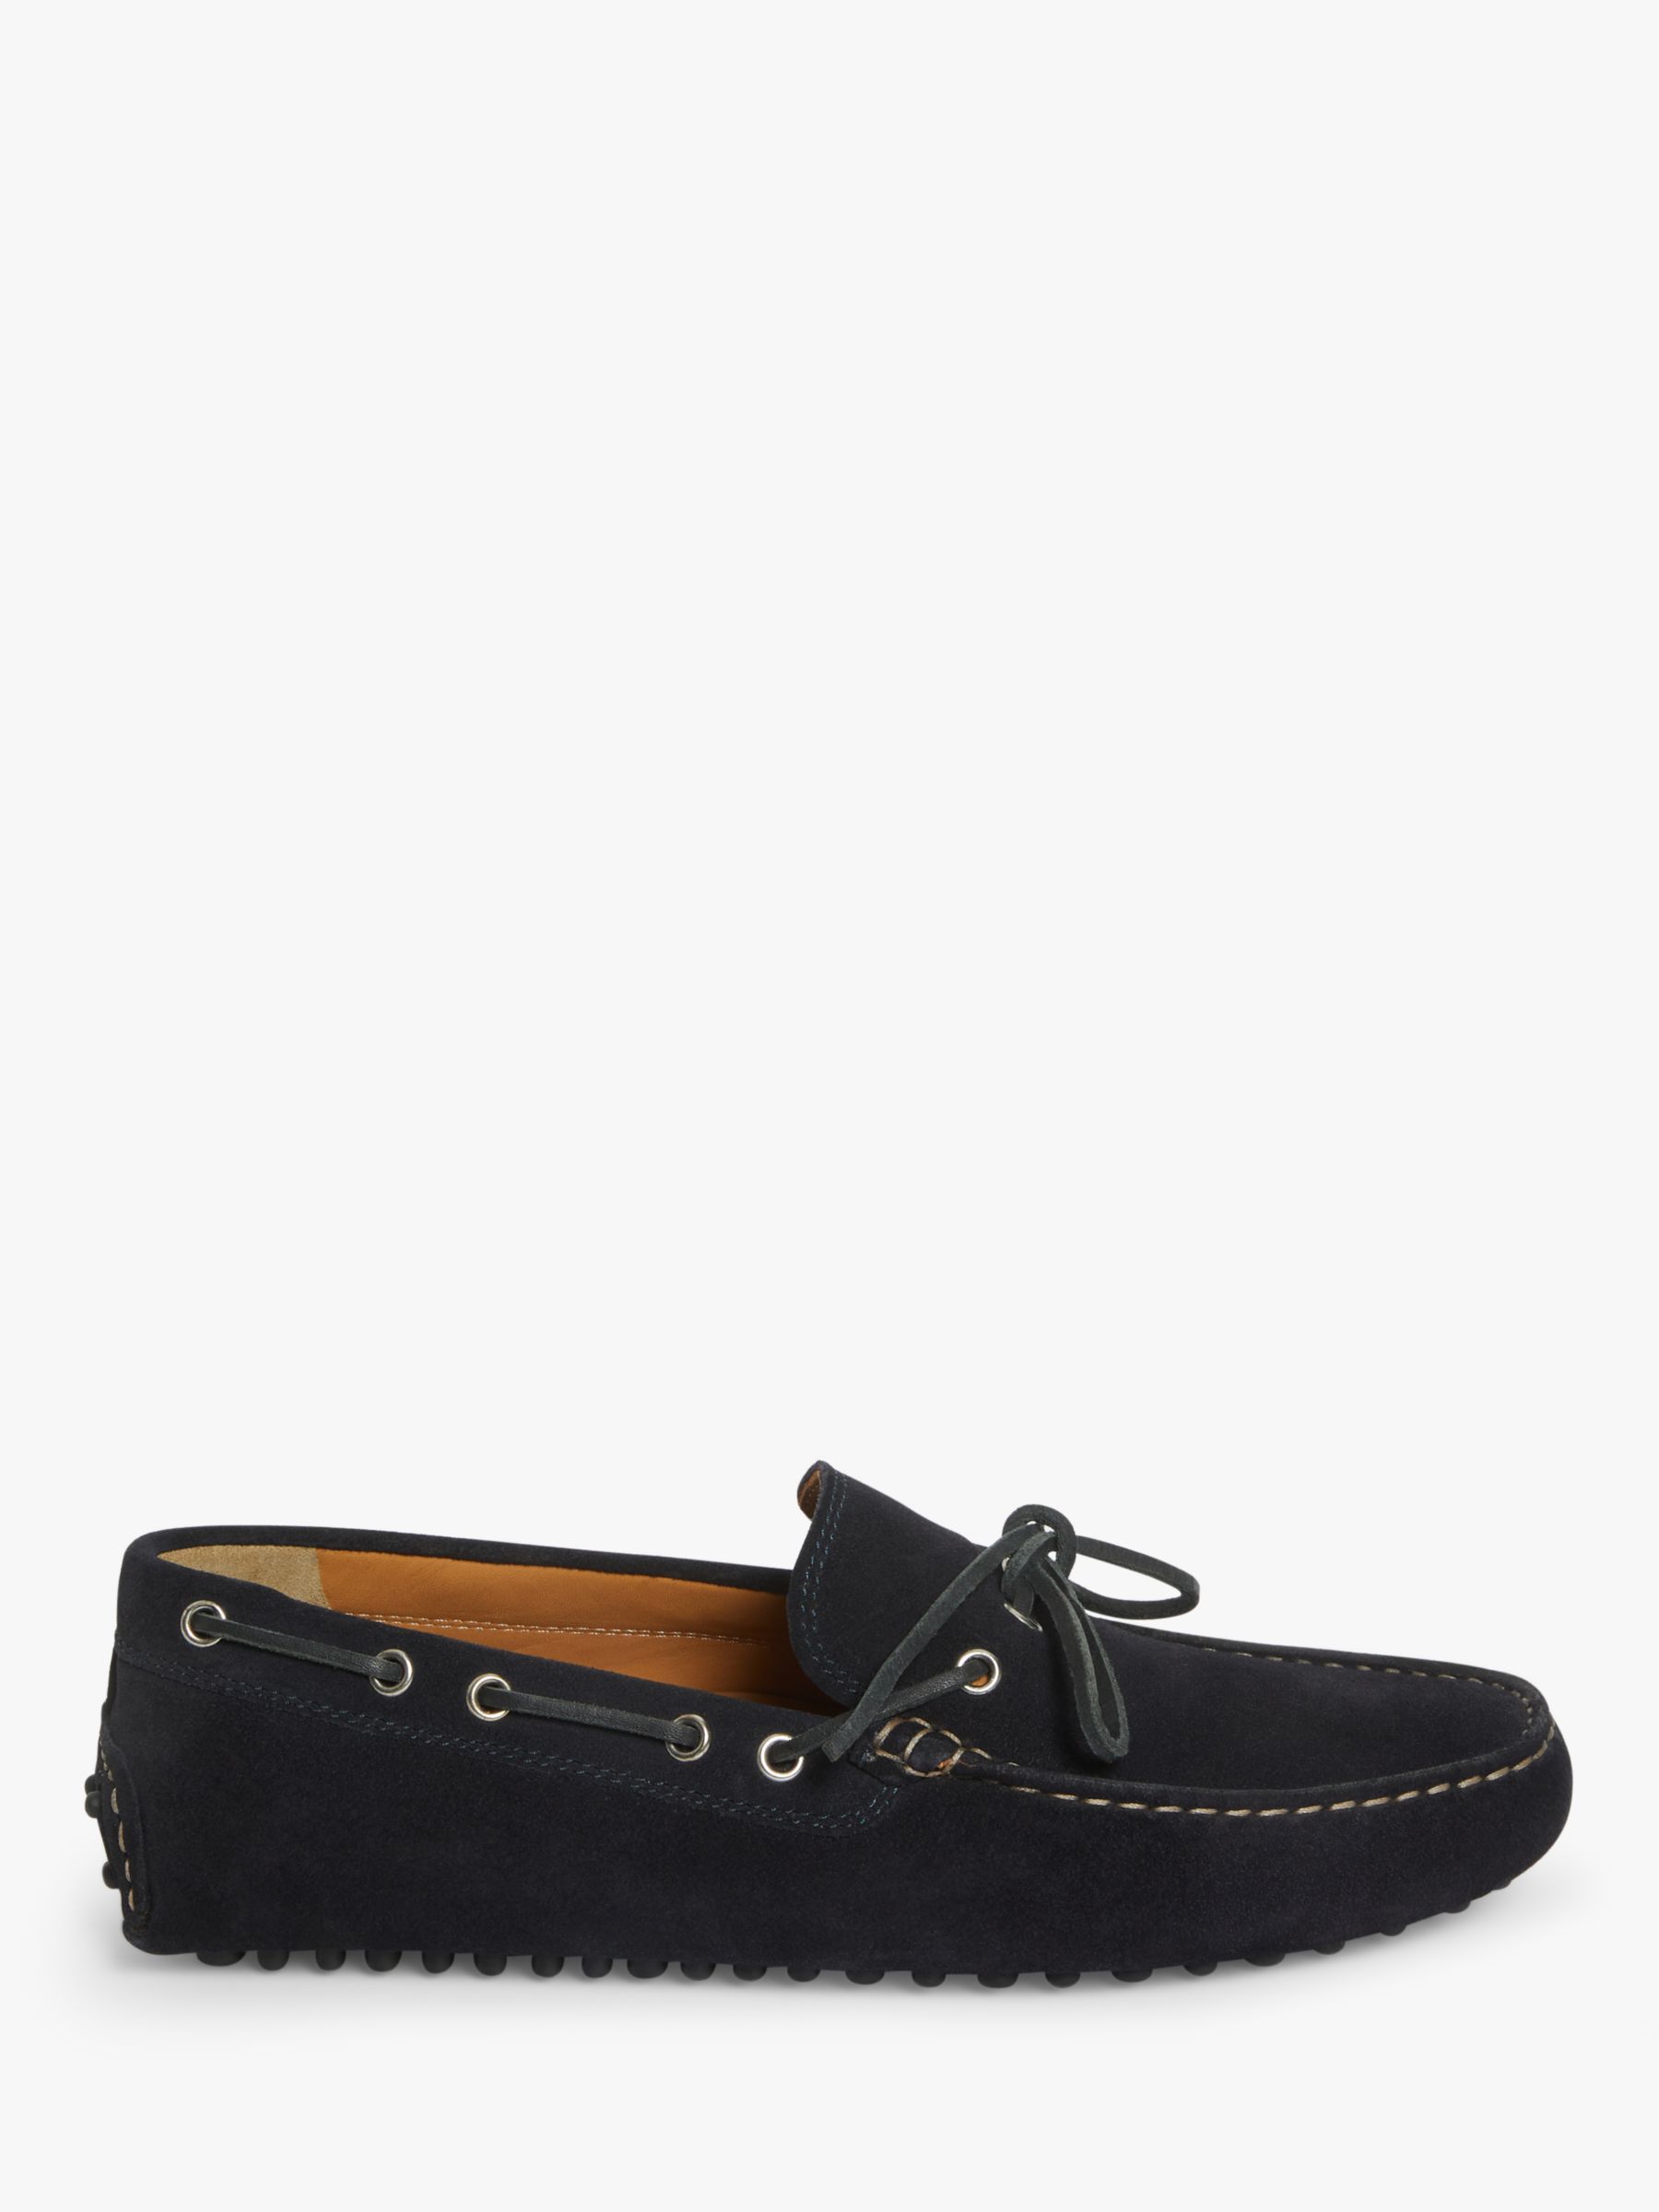 John Lewis Suede Driving Shoes